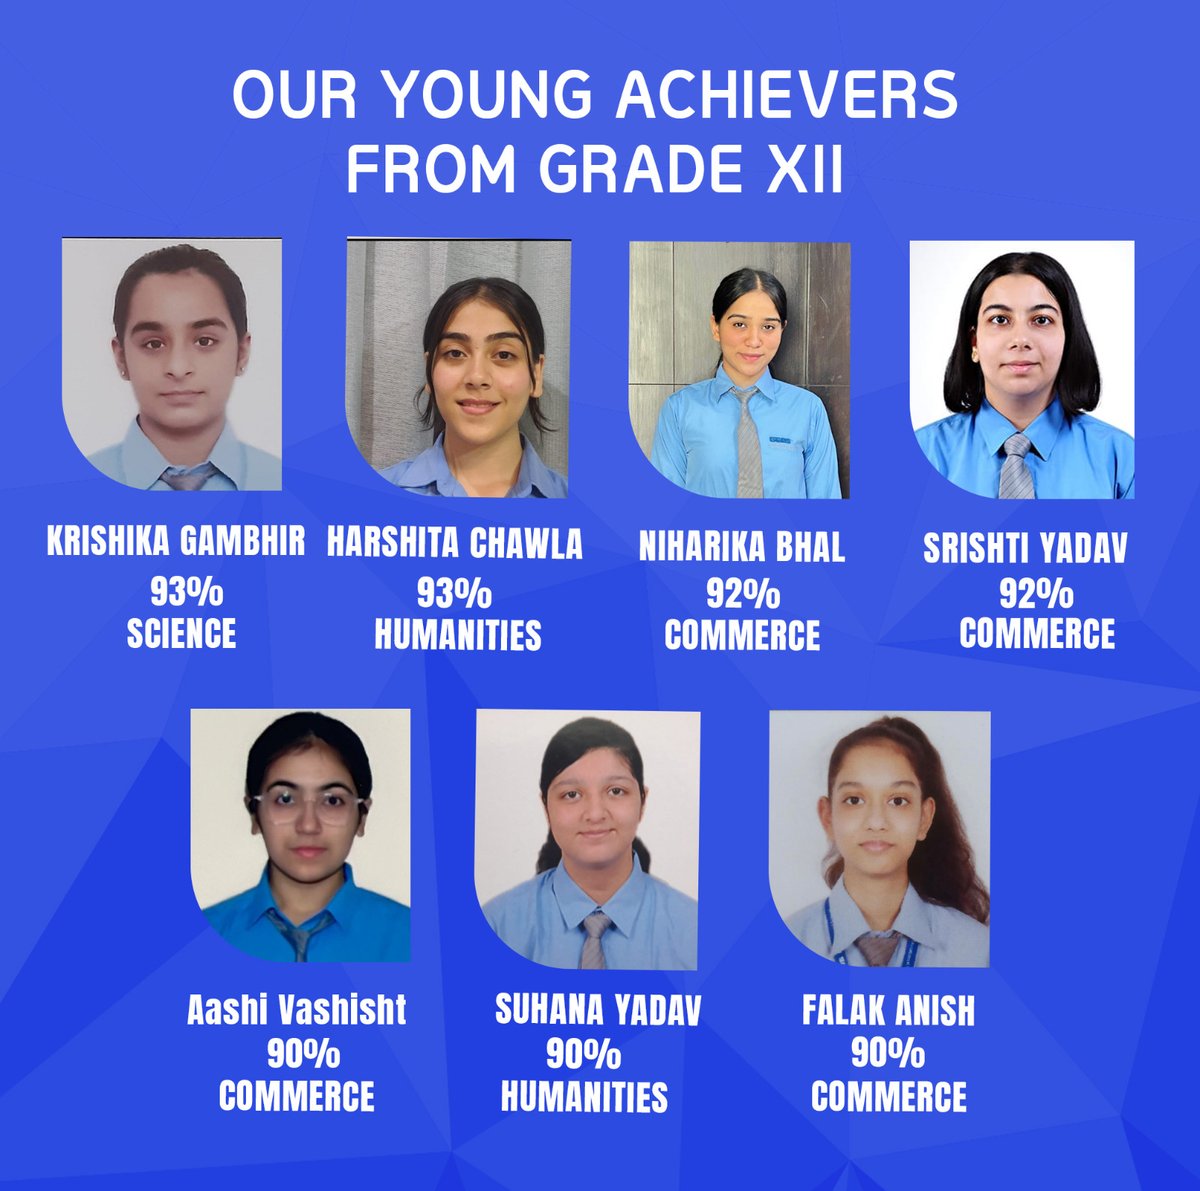 GEMS International School, Gurugram congratulates all the students for achieving outstanding results in the X and XII CBSE Board exams. Your exemplary performance demonstrates academic excellence. May you continue to scale greater heights. Heartiest Congratulations!